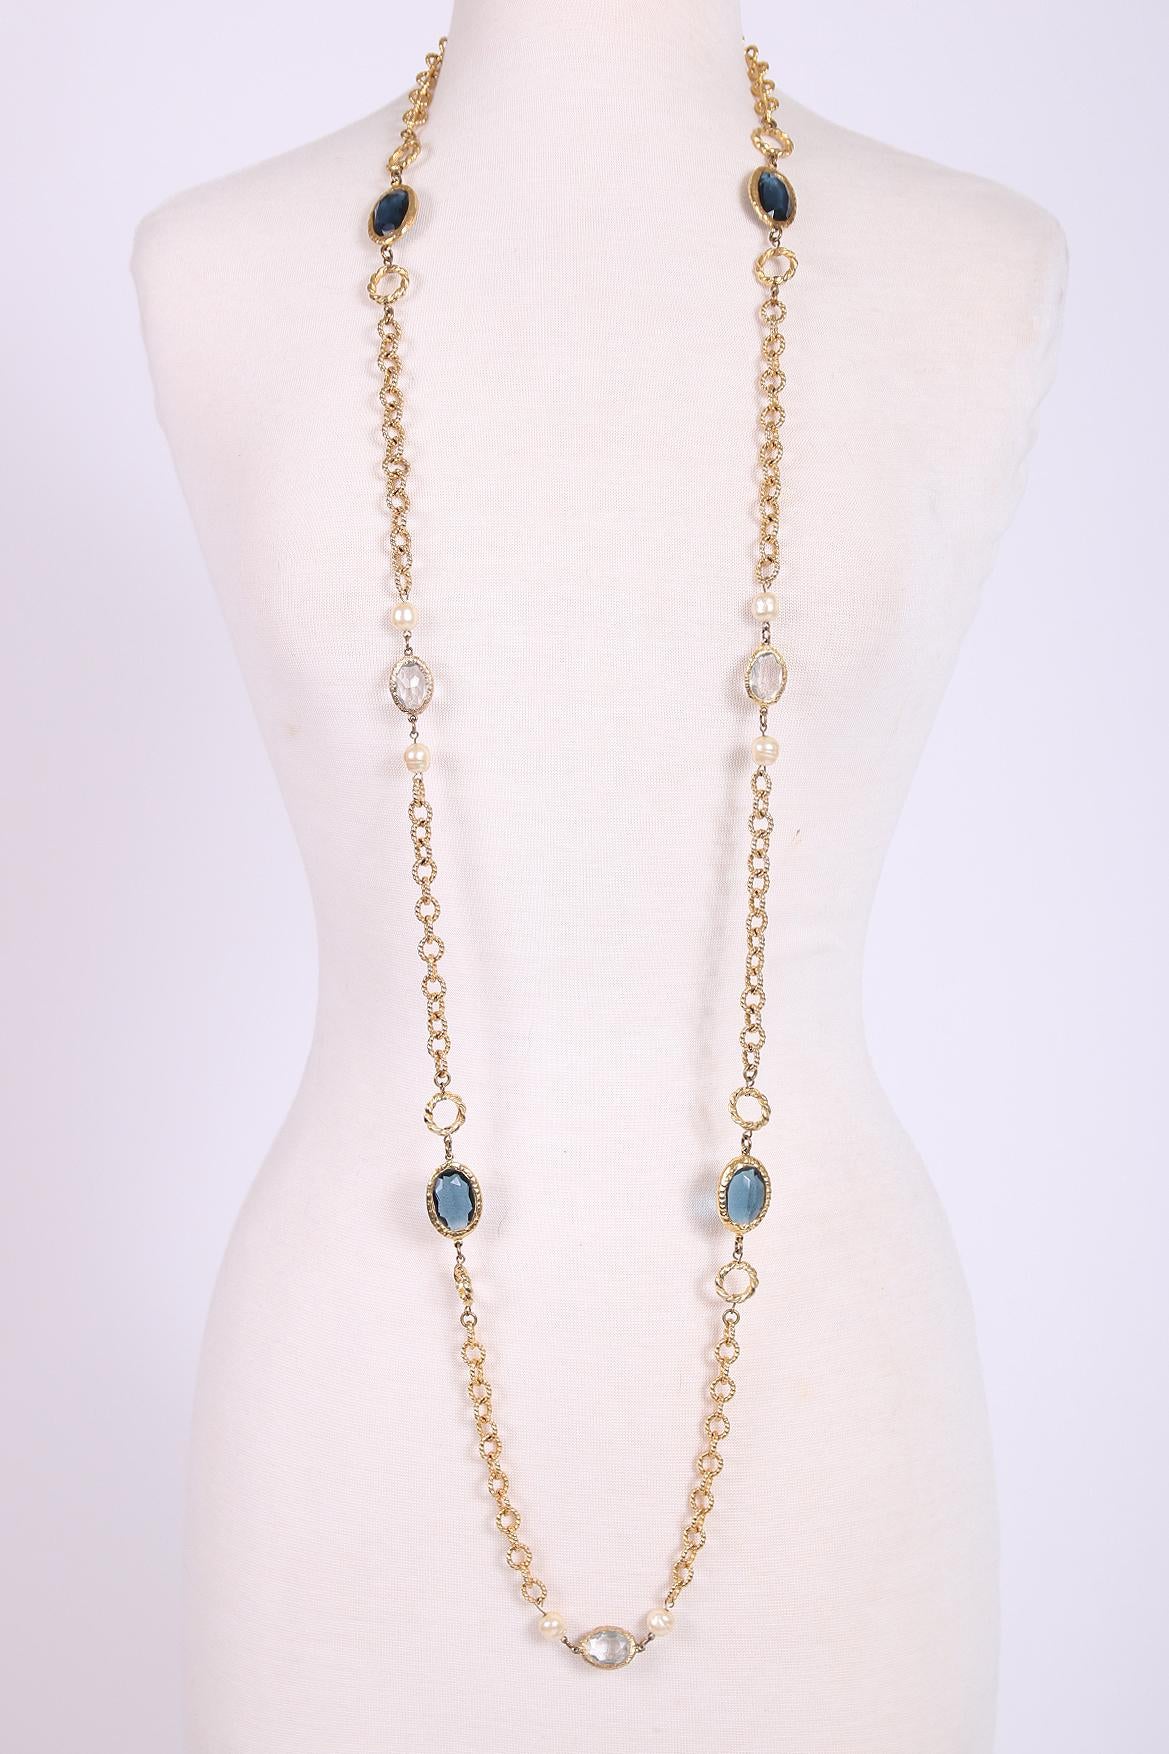 1981 Chanel 24k gold plated sautoir necklace made from textured gold links, baroque pearls and two sizes of oval, hammered gold bezel-set dark blue & clear Gripoix glass beads. Necklace was purchased by original owner at  Bergdorf Goodman in the